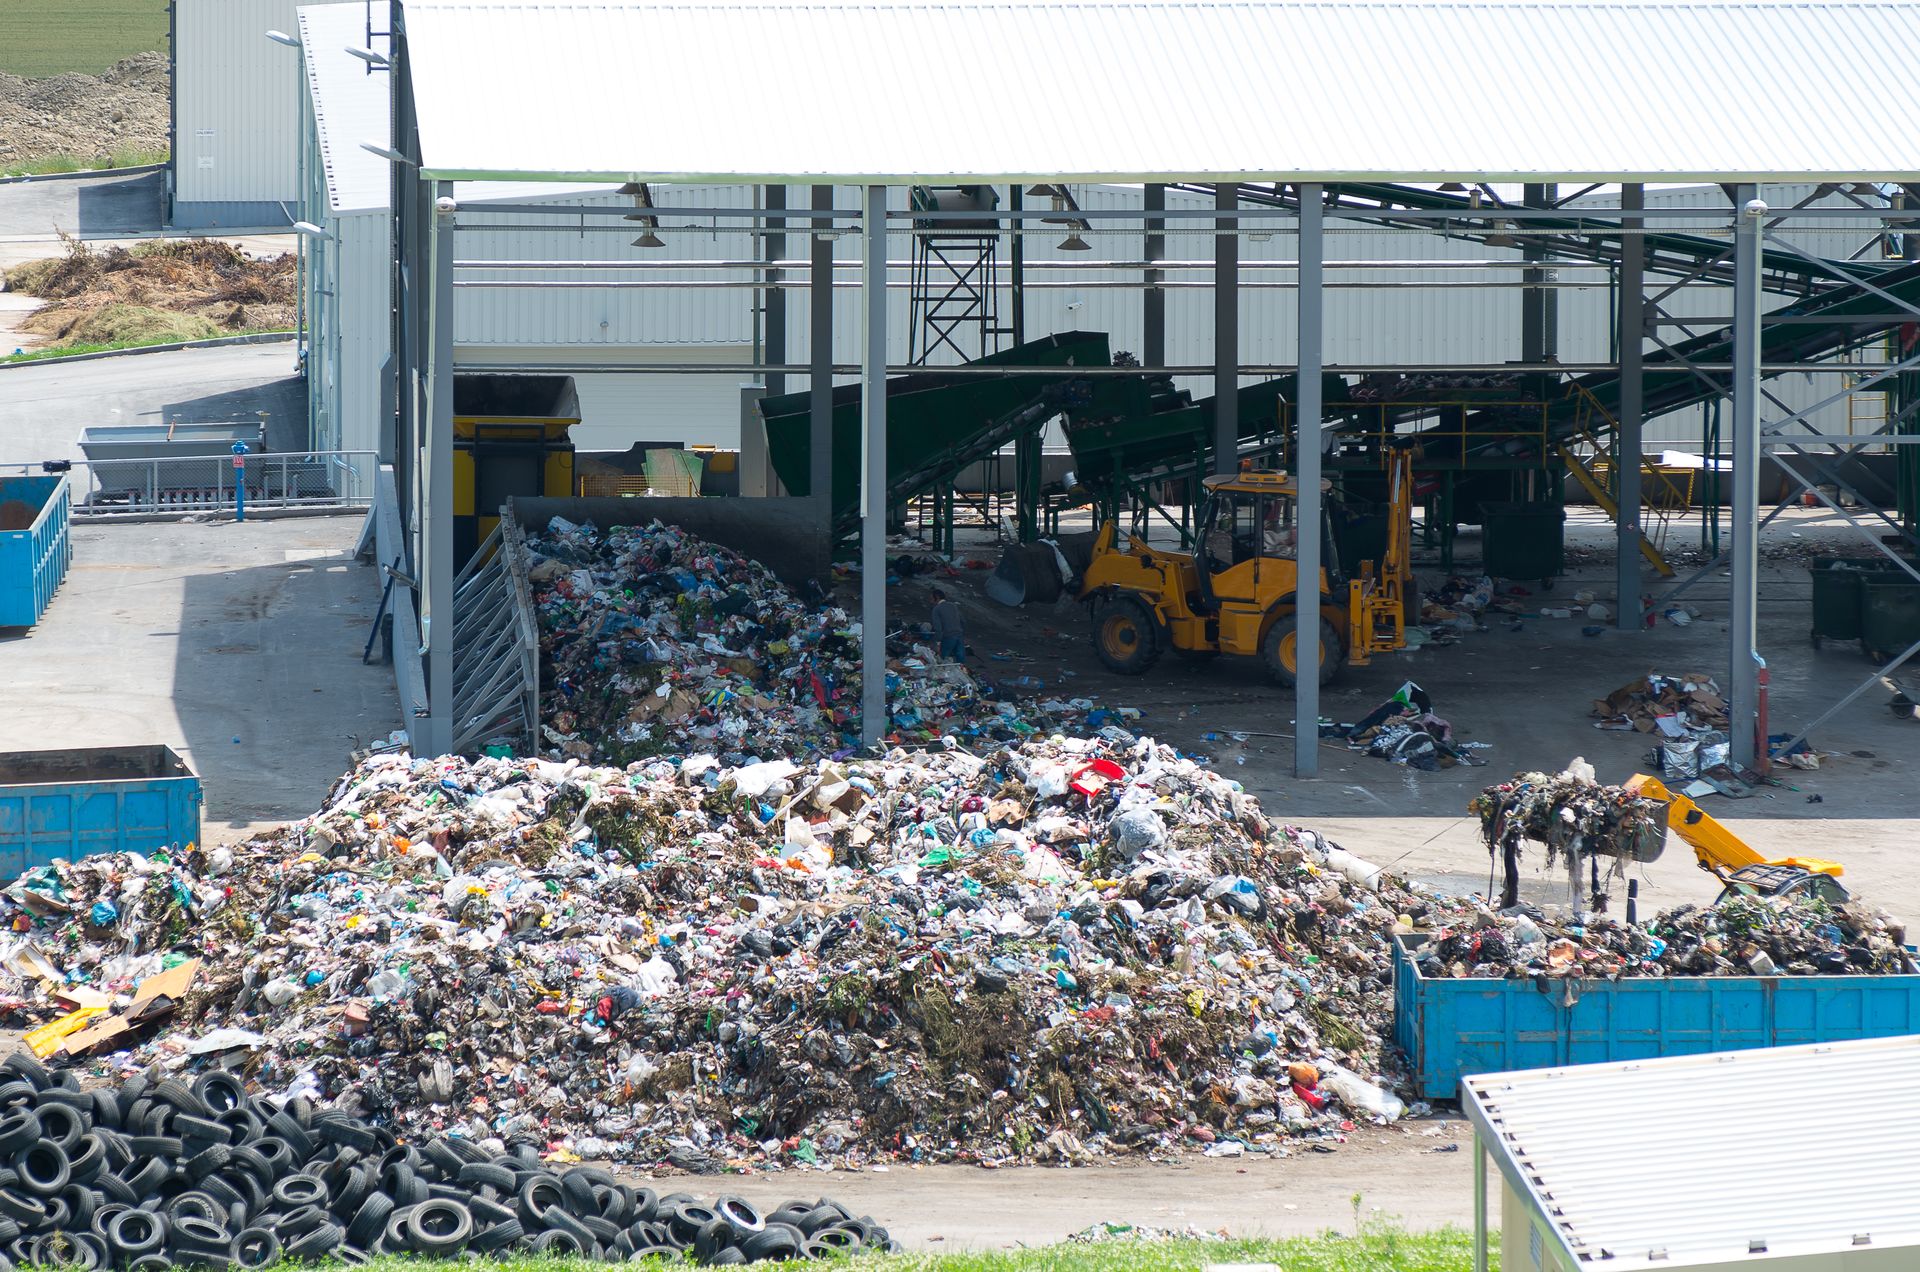 Urban landfill. Waste treatment plant depot. Waste disposal, management, reuse, recycle and recovery concept